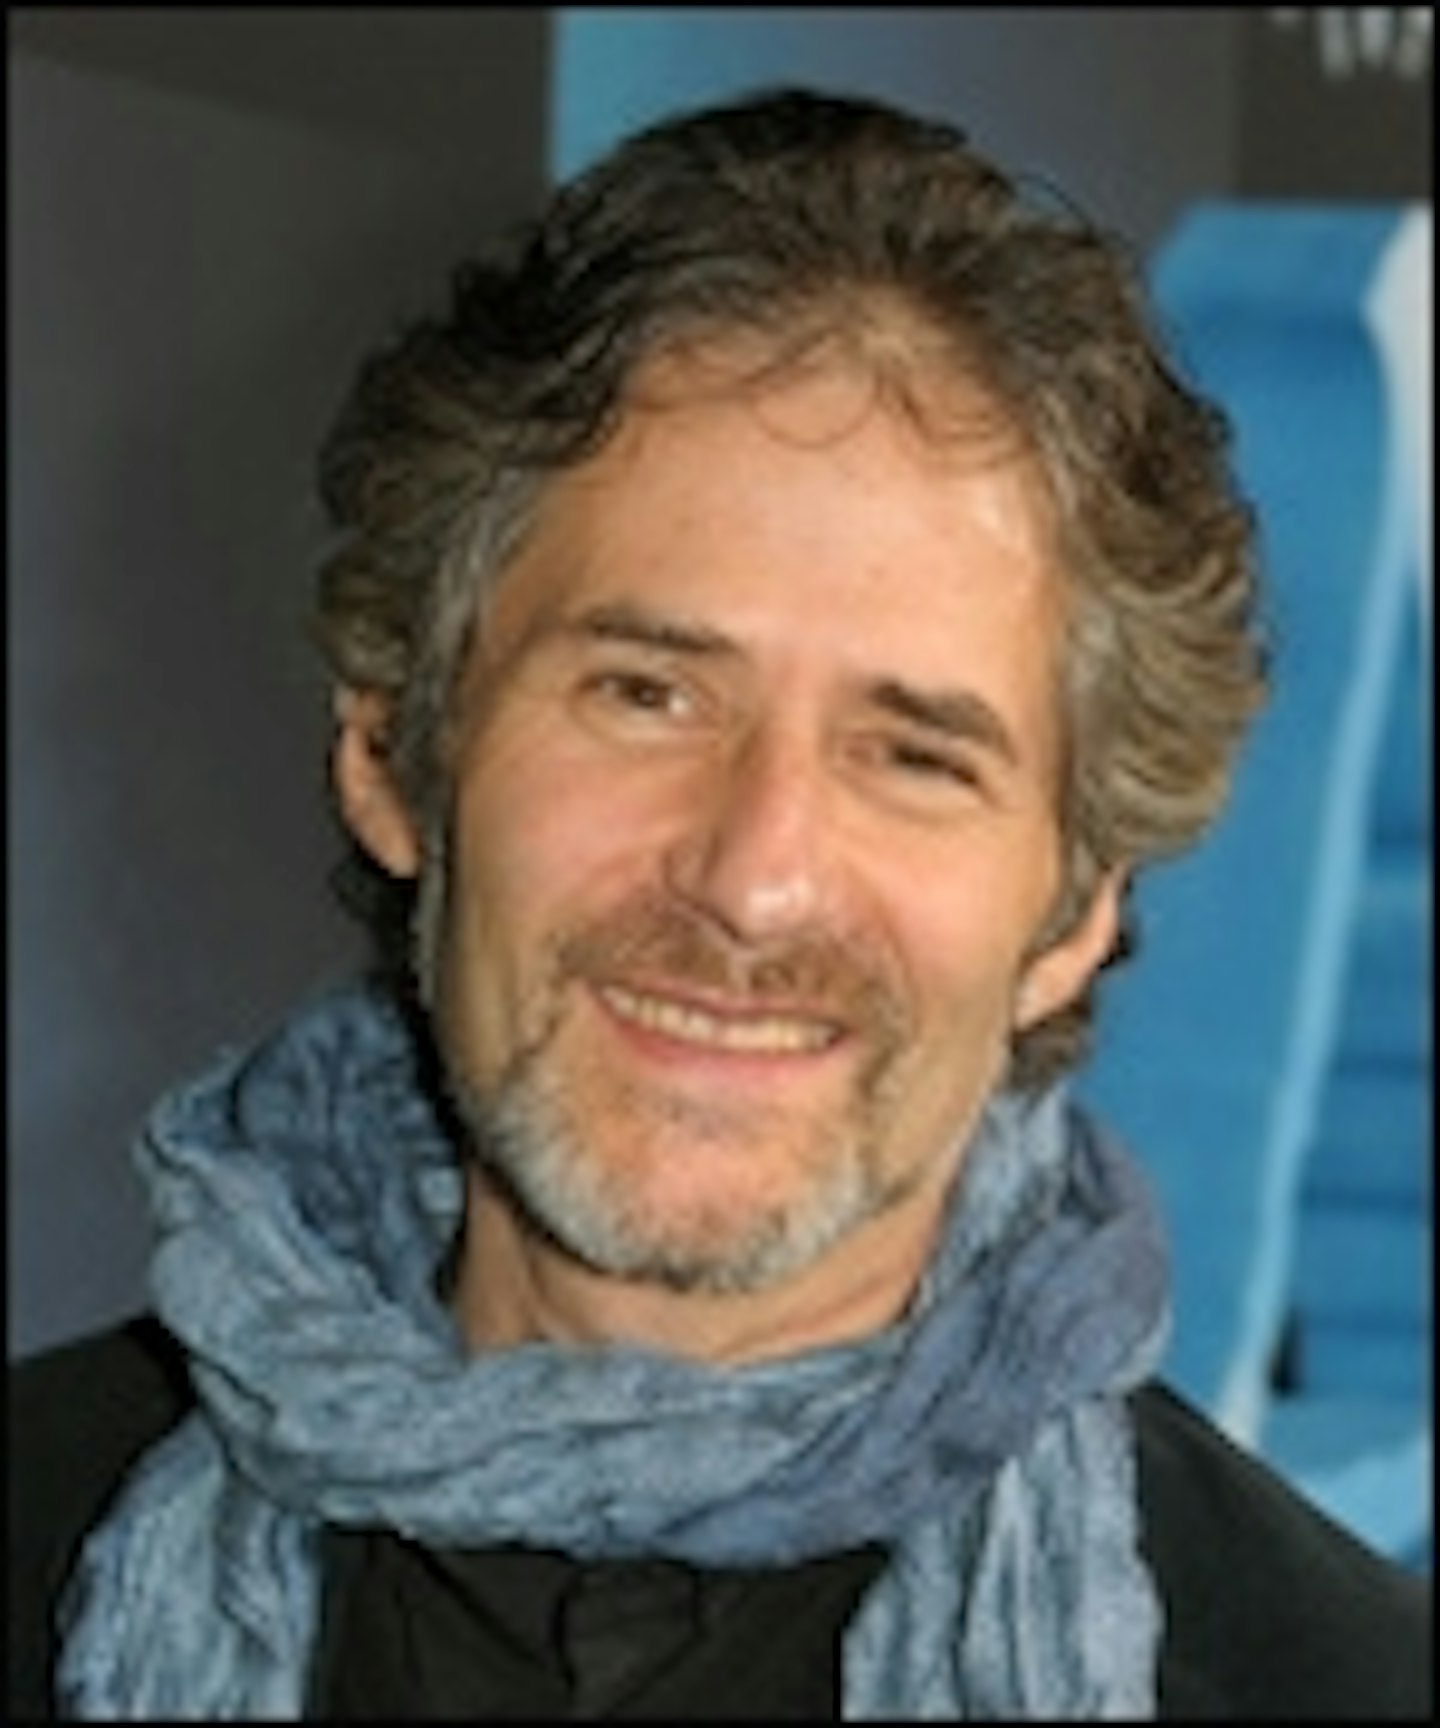 James Horner Wrote Music For Antoine Fuqua's Magnificent Seven